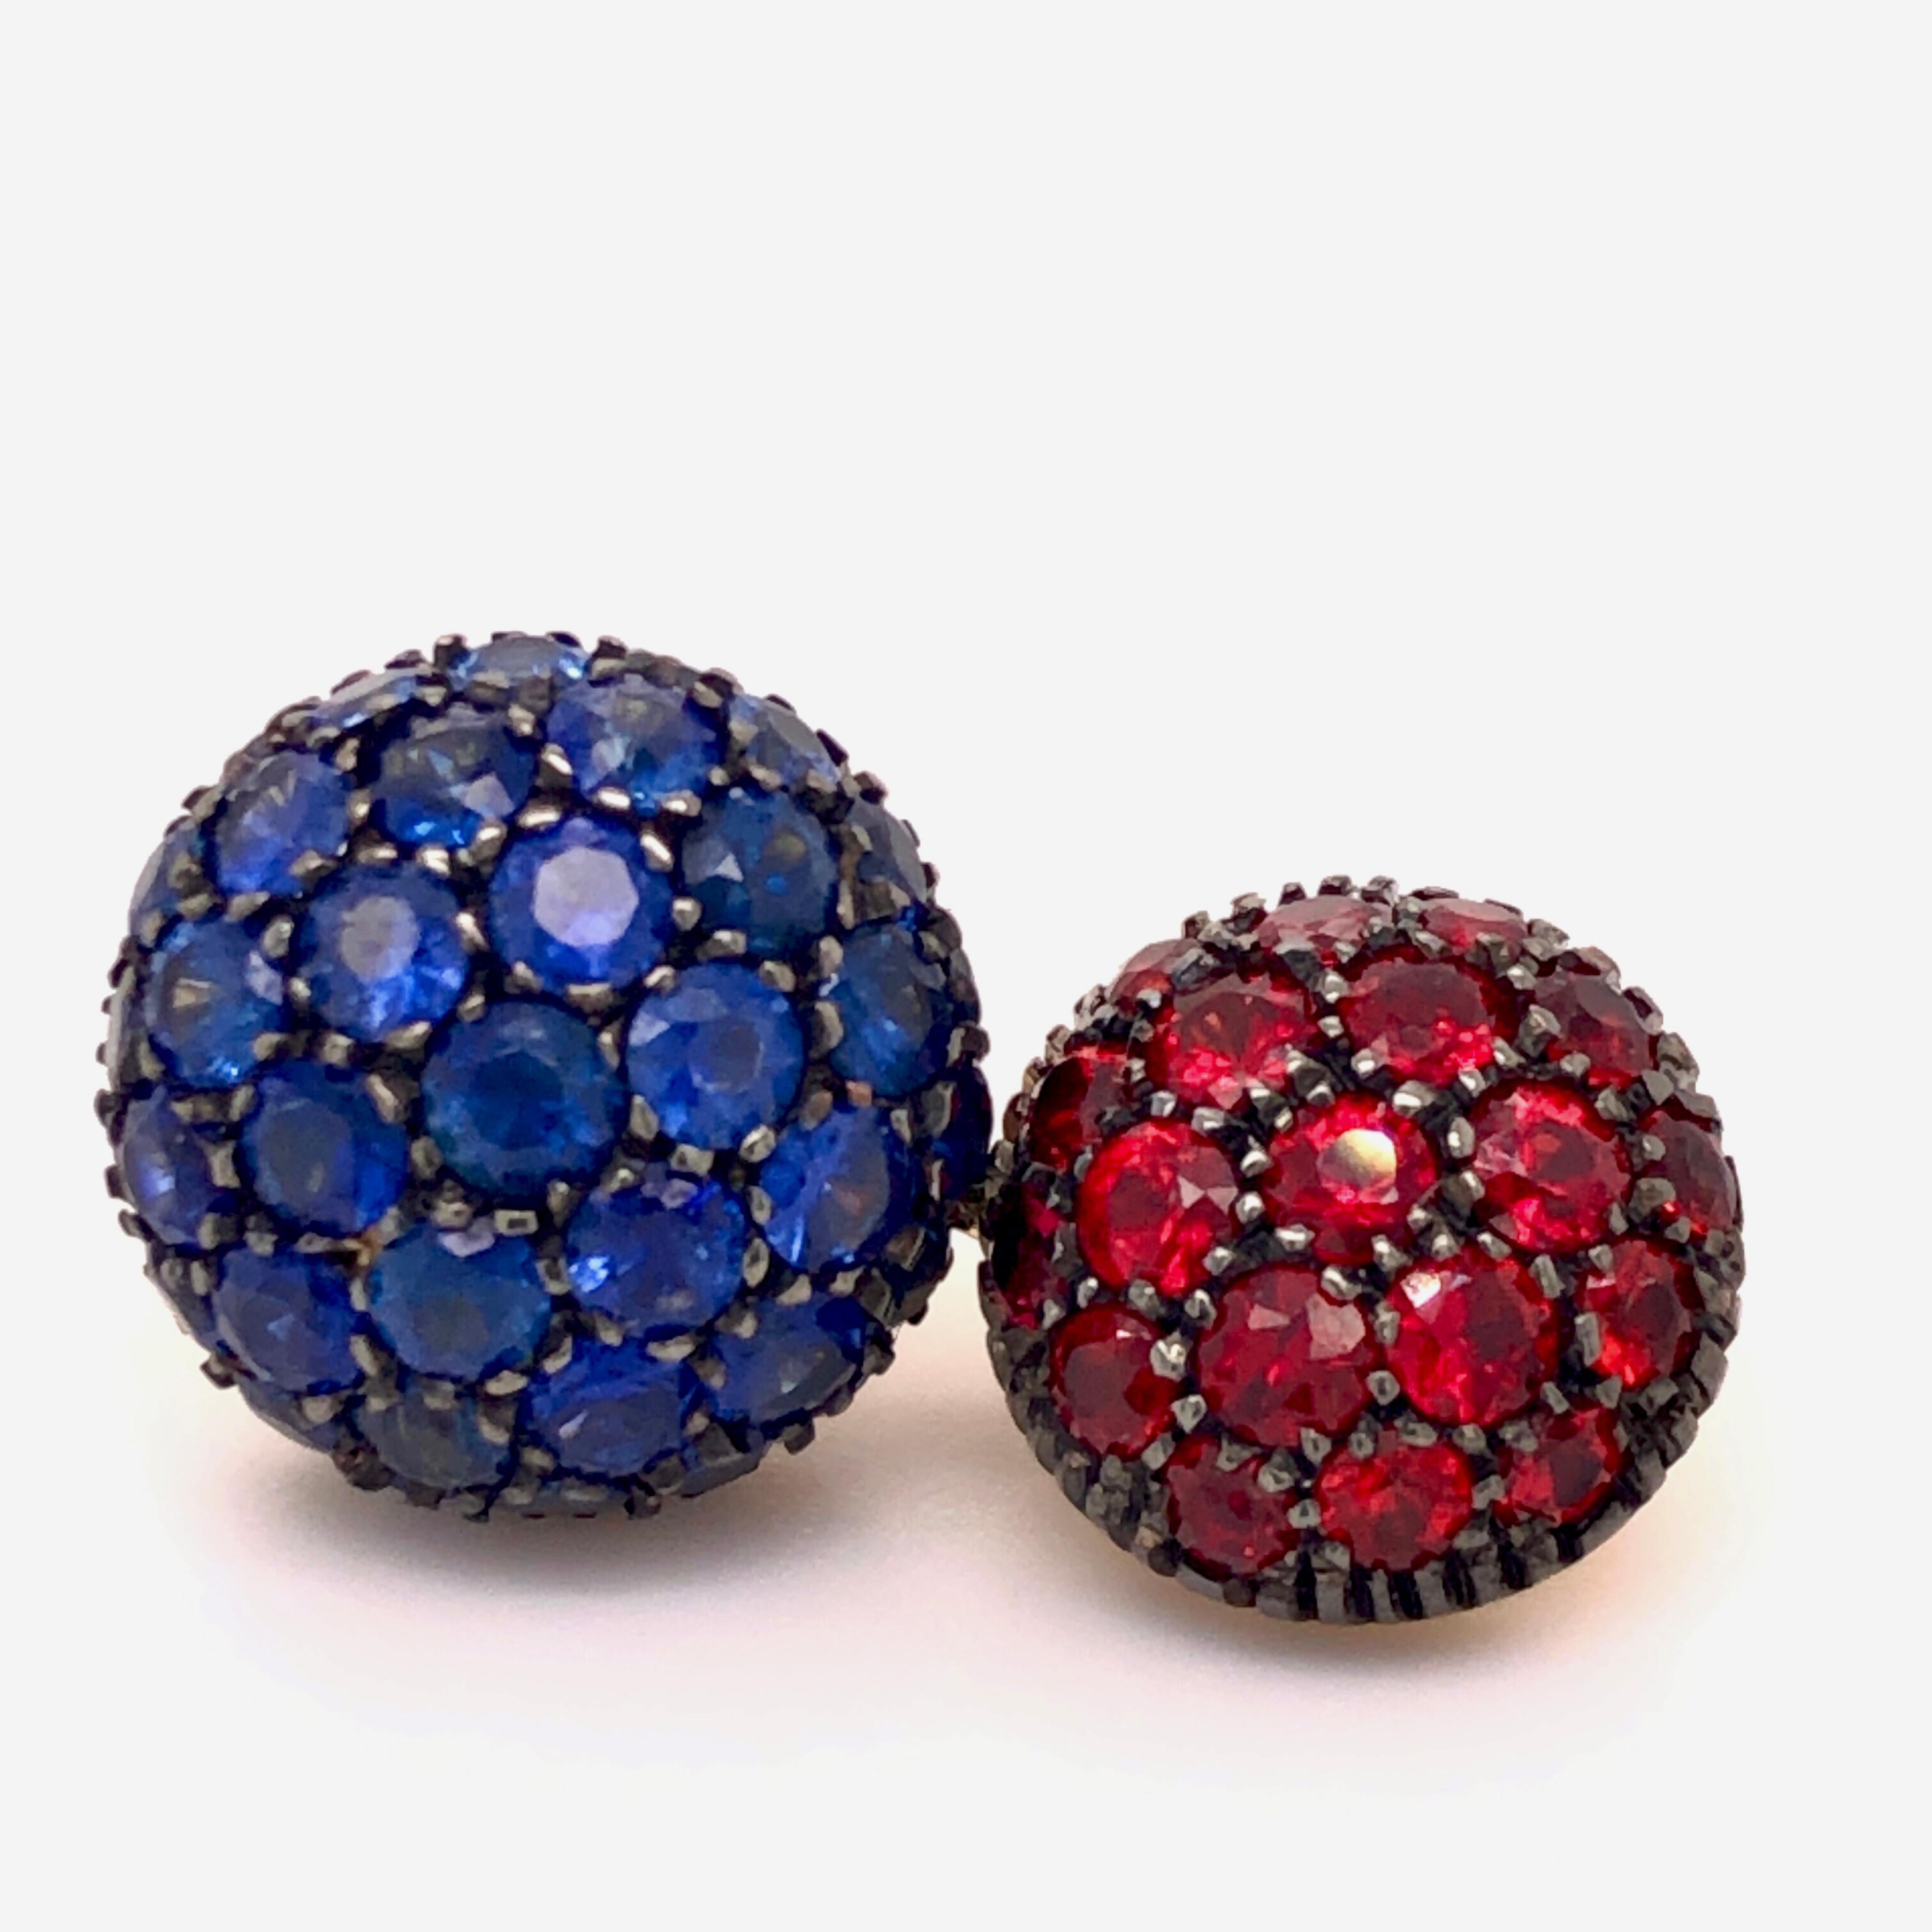 Absolutely Chic, Smart yet Timeless 5.21 Carat Natural Round Blue Brilliant Cut Sapphire and 2.40 Carat Natural Ruby in a 0.37 OzT 18Kt Oxidized Black and Yellow Gold Round Cabochon Setting, 
All our Cufflinks are new, never been previously owned or